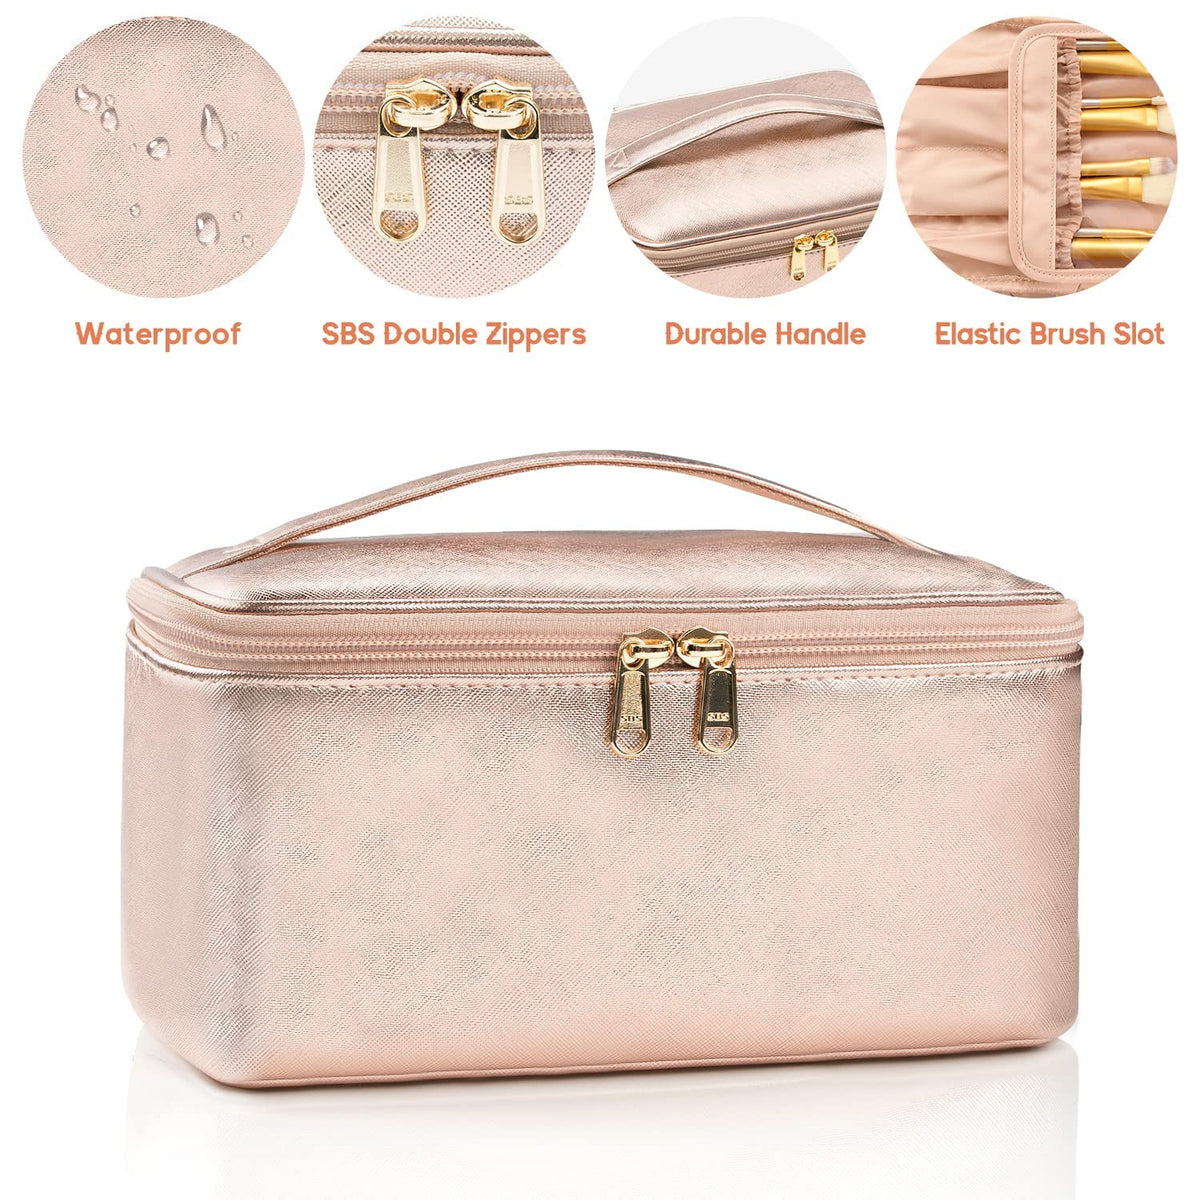 Buy Rose Gold Leopard Makeup Bag Travel Cosmetic Bag for Women Large Cute  Makeup Case Organizer with Adjustable Dividers Online at Low Prices in  India 